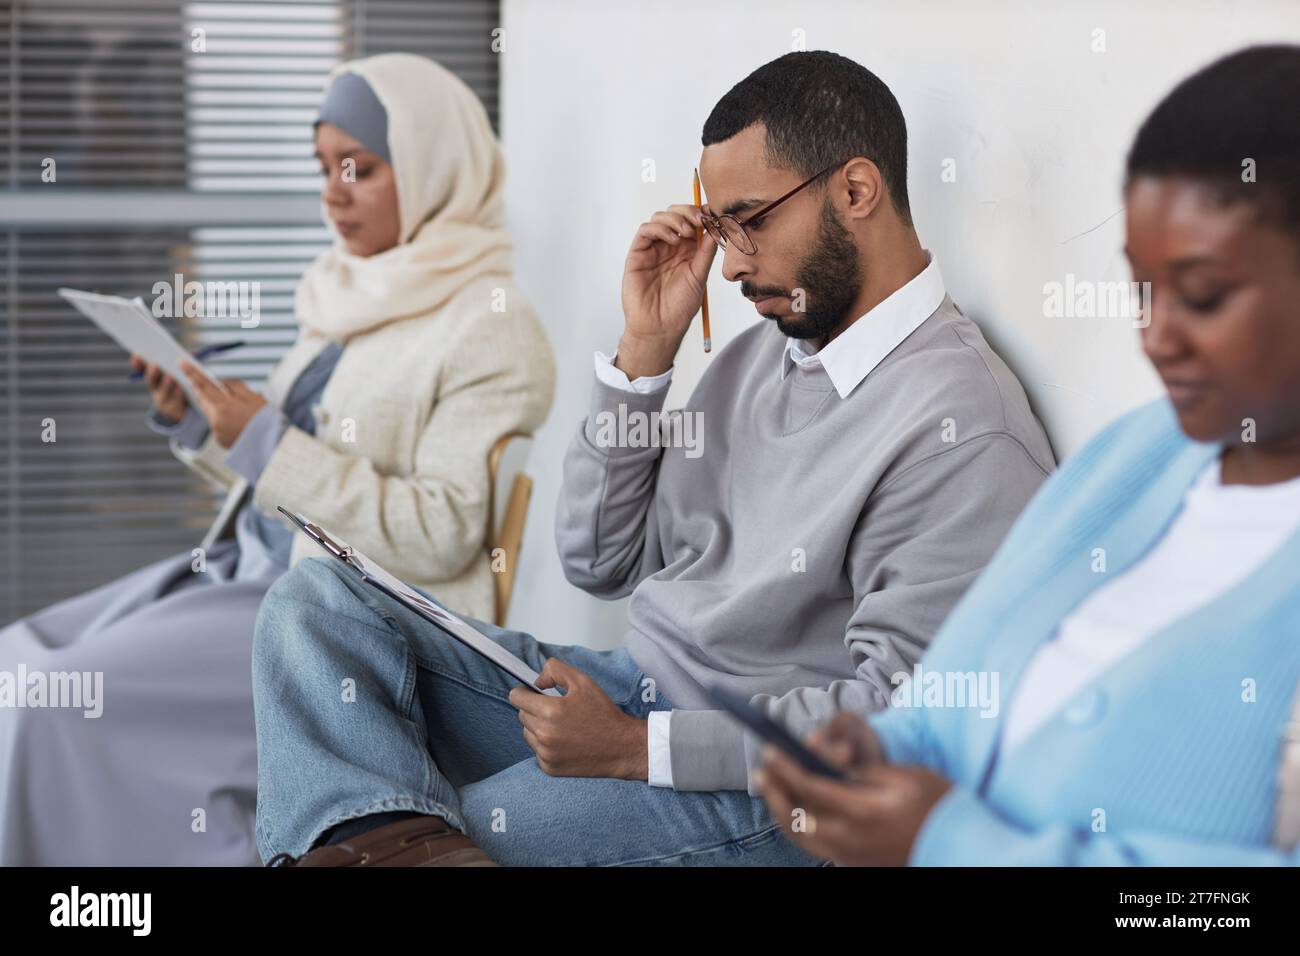 Focus on young serious multiethnic man looking through questions of visa application form and thinking of answers while sitting in queue Stock Photo